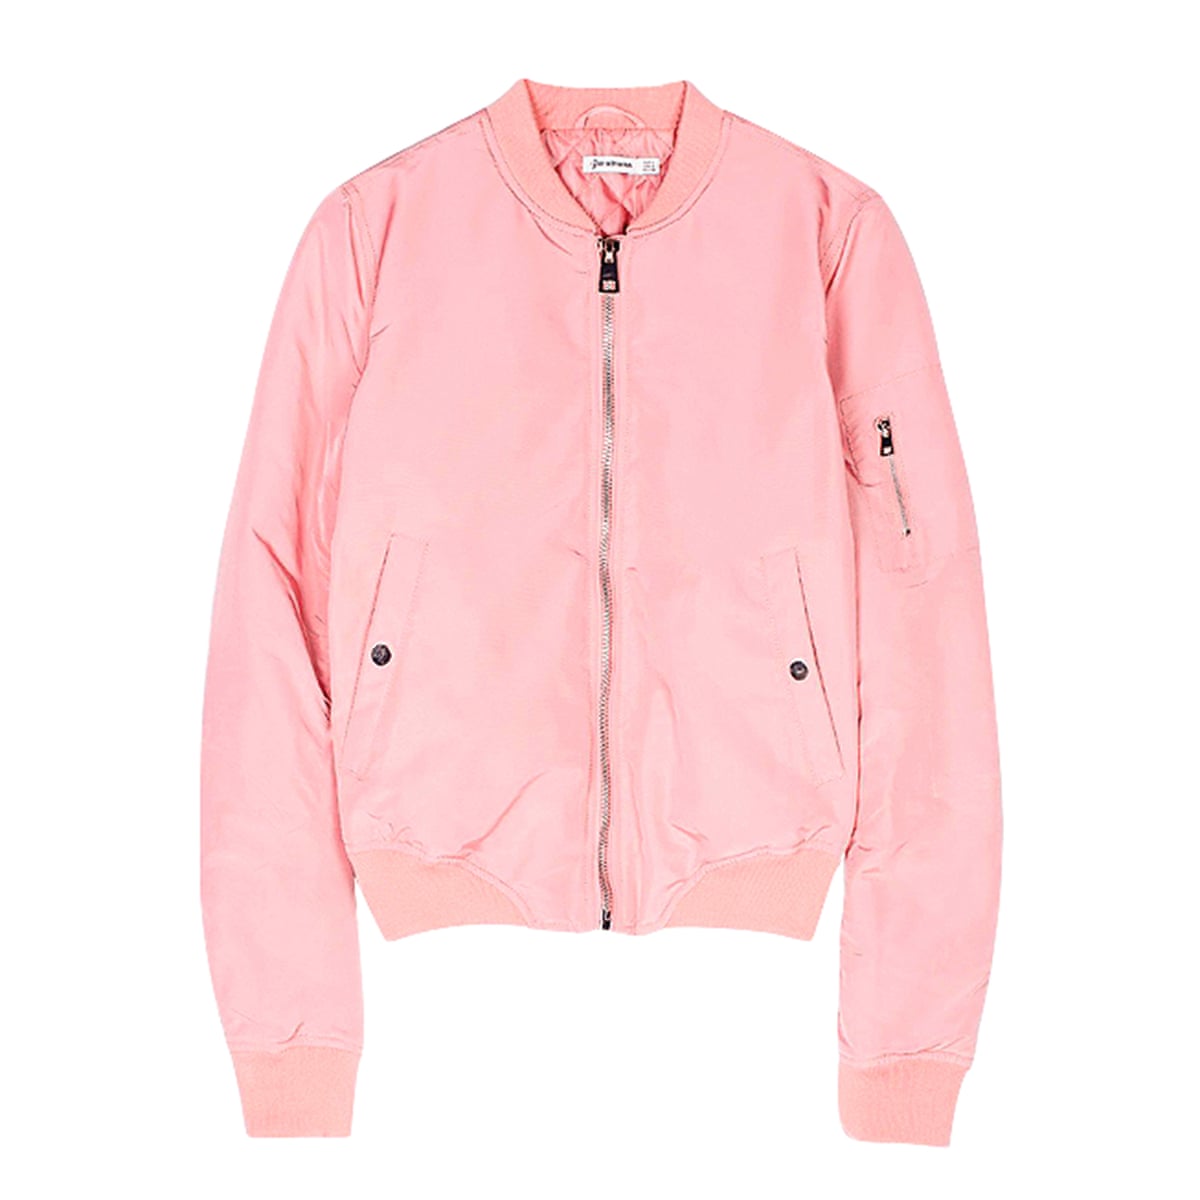 The fashion edit: be in the pink with our top 10 | Fashion | The Guardian